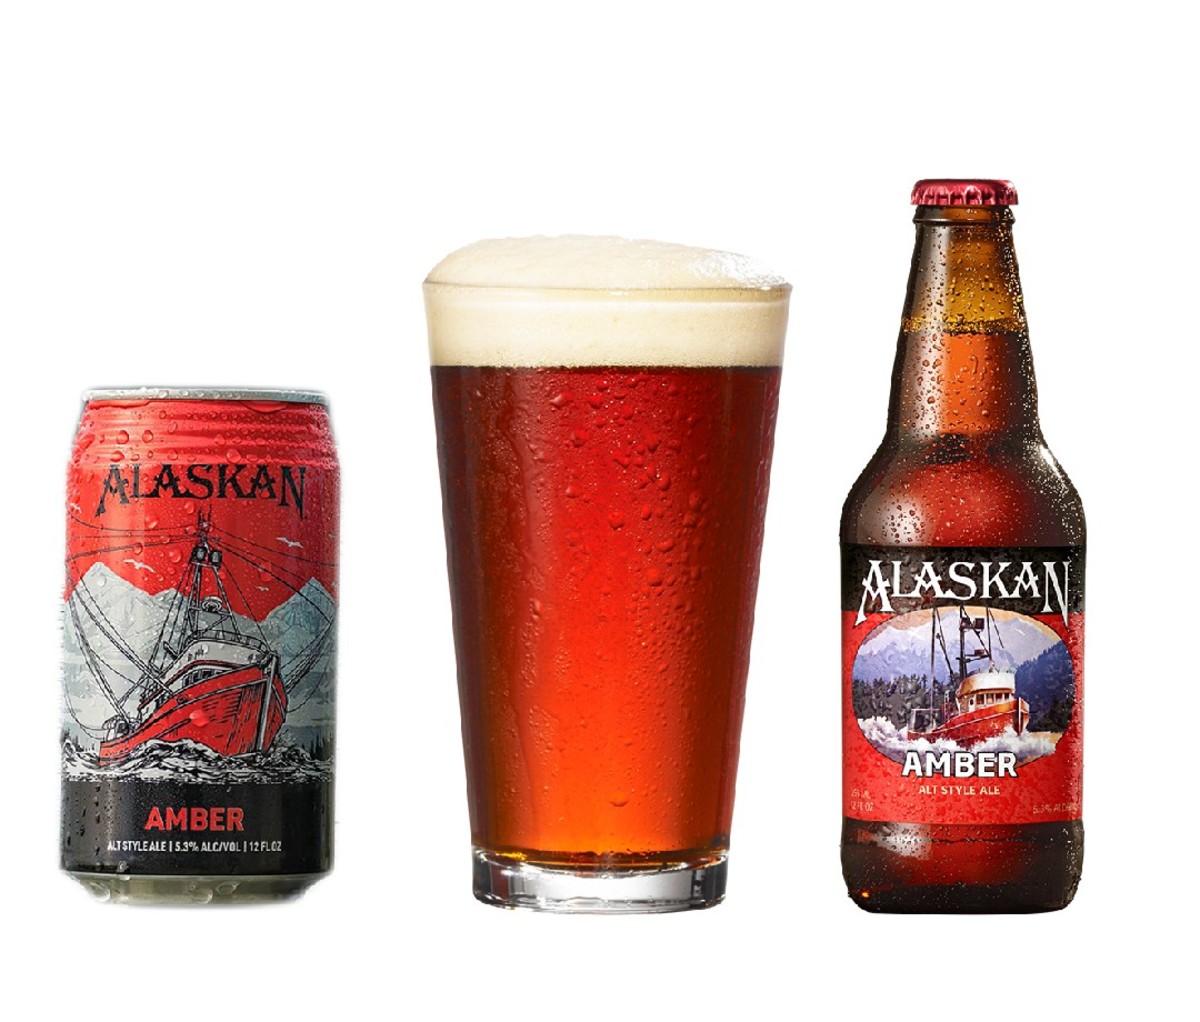 Can, filled pint glass and bottle of Alaskan Amber Ale beer